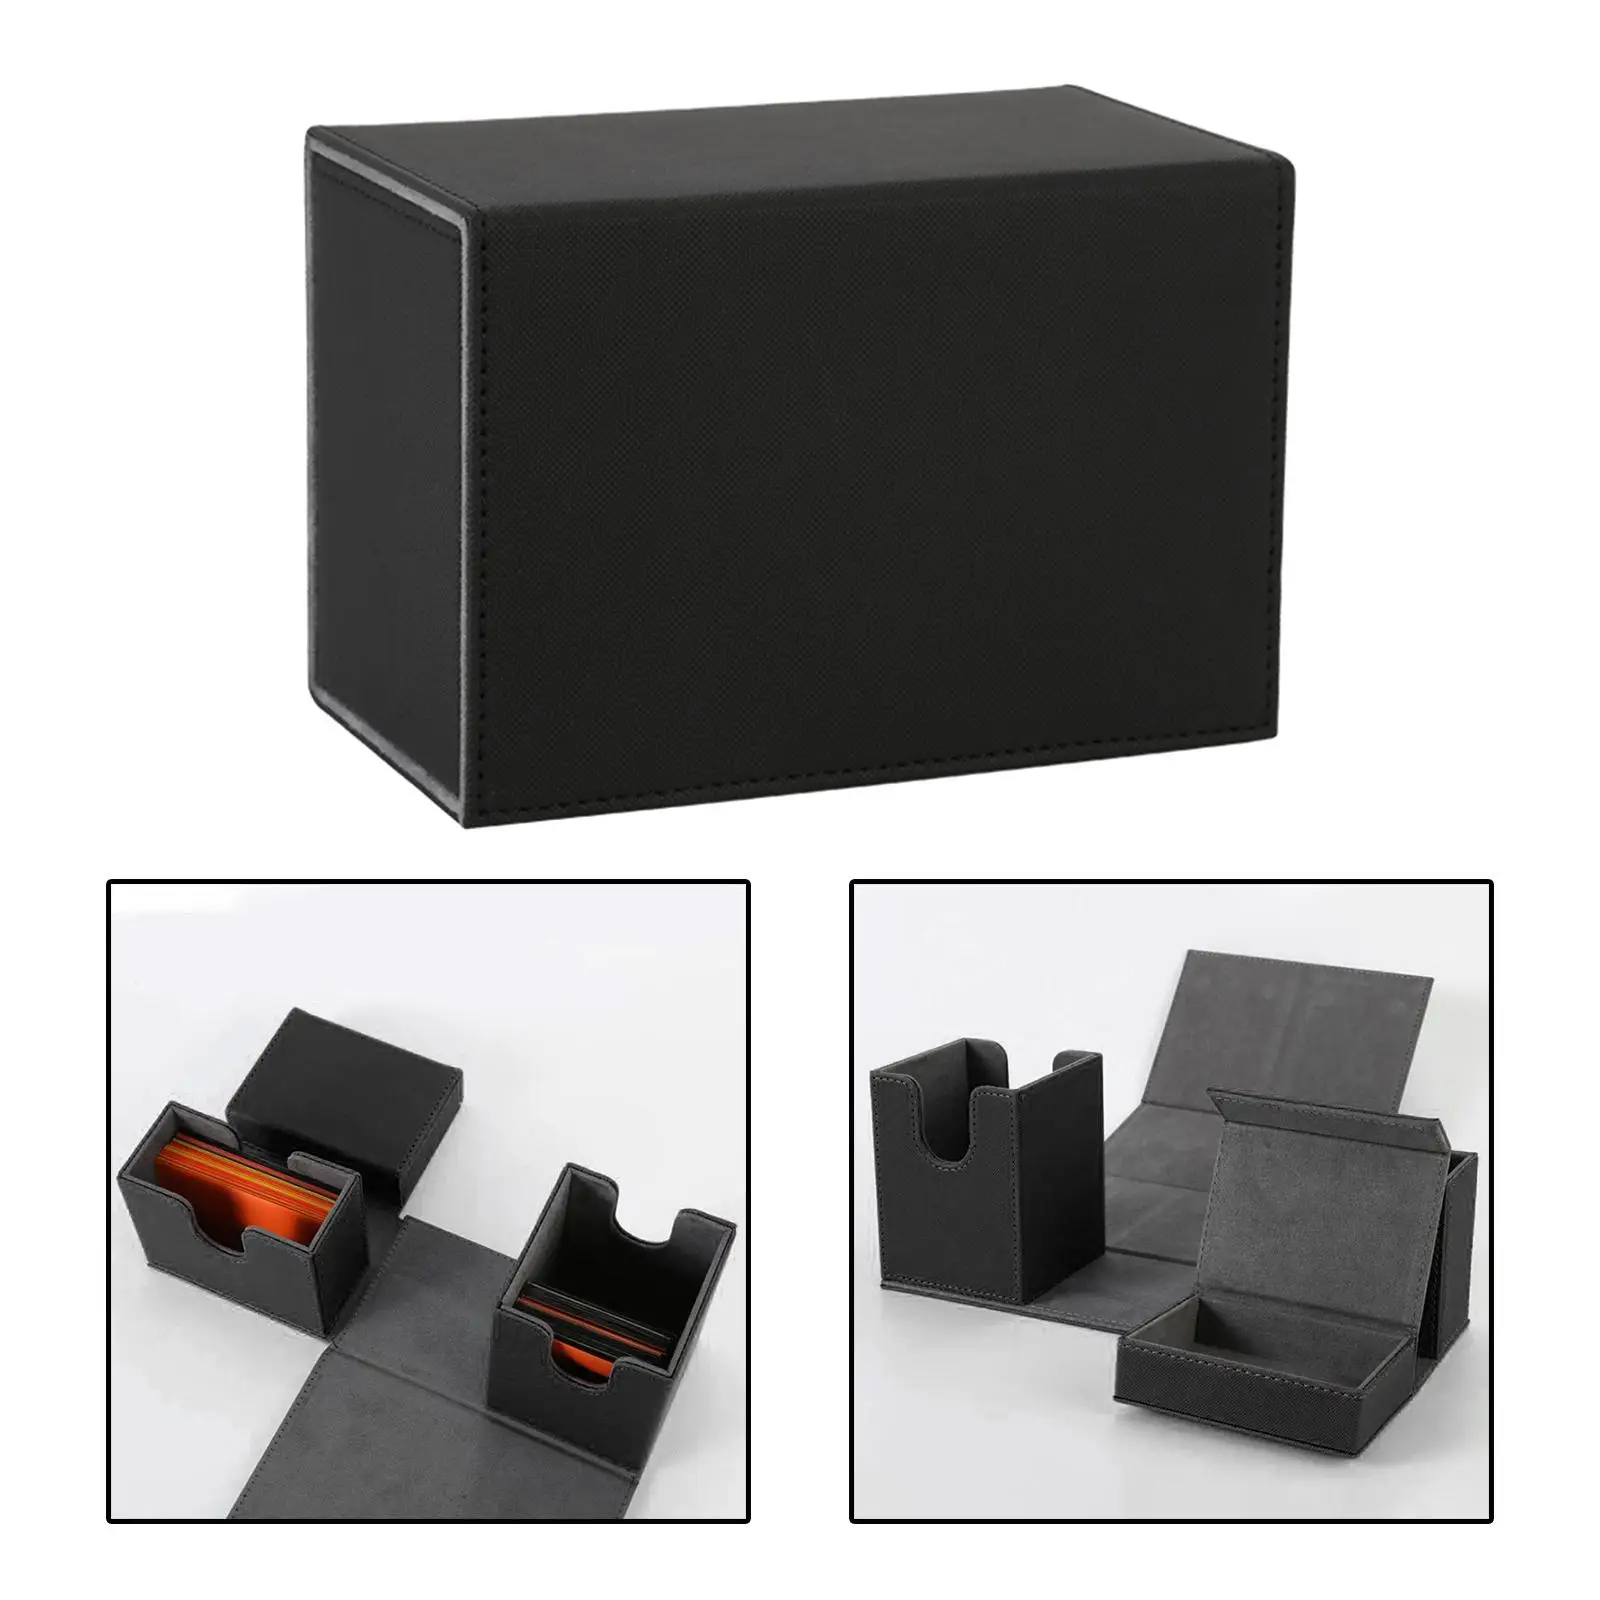 Game Card Storage Box Good Protection Sturdy for for Nds Card Board Games